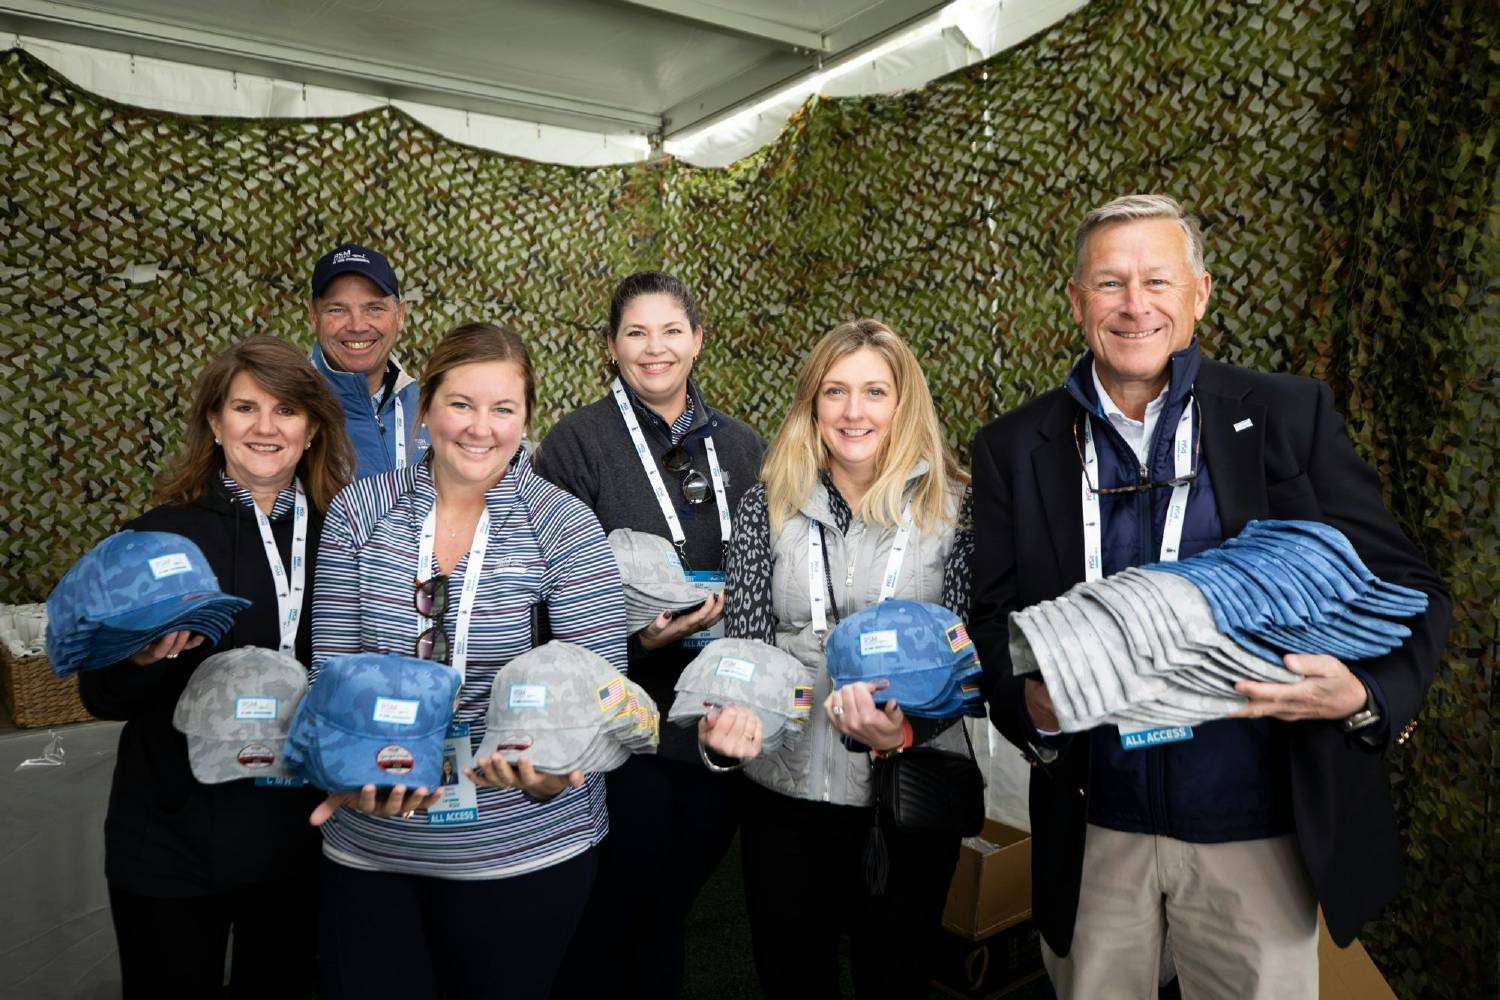 RSM proudly supports veterans and first responders with a Heroes Outpost at the PGA tour event, the RSM Classic.